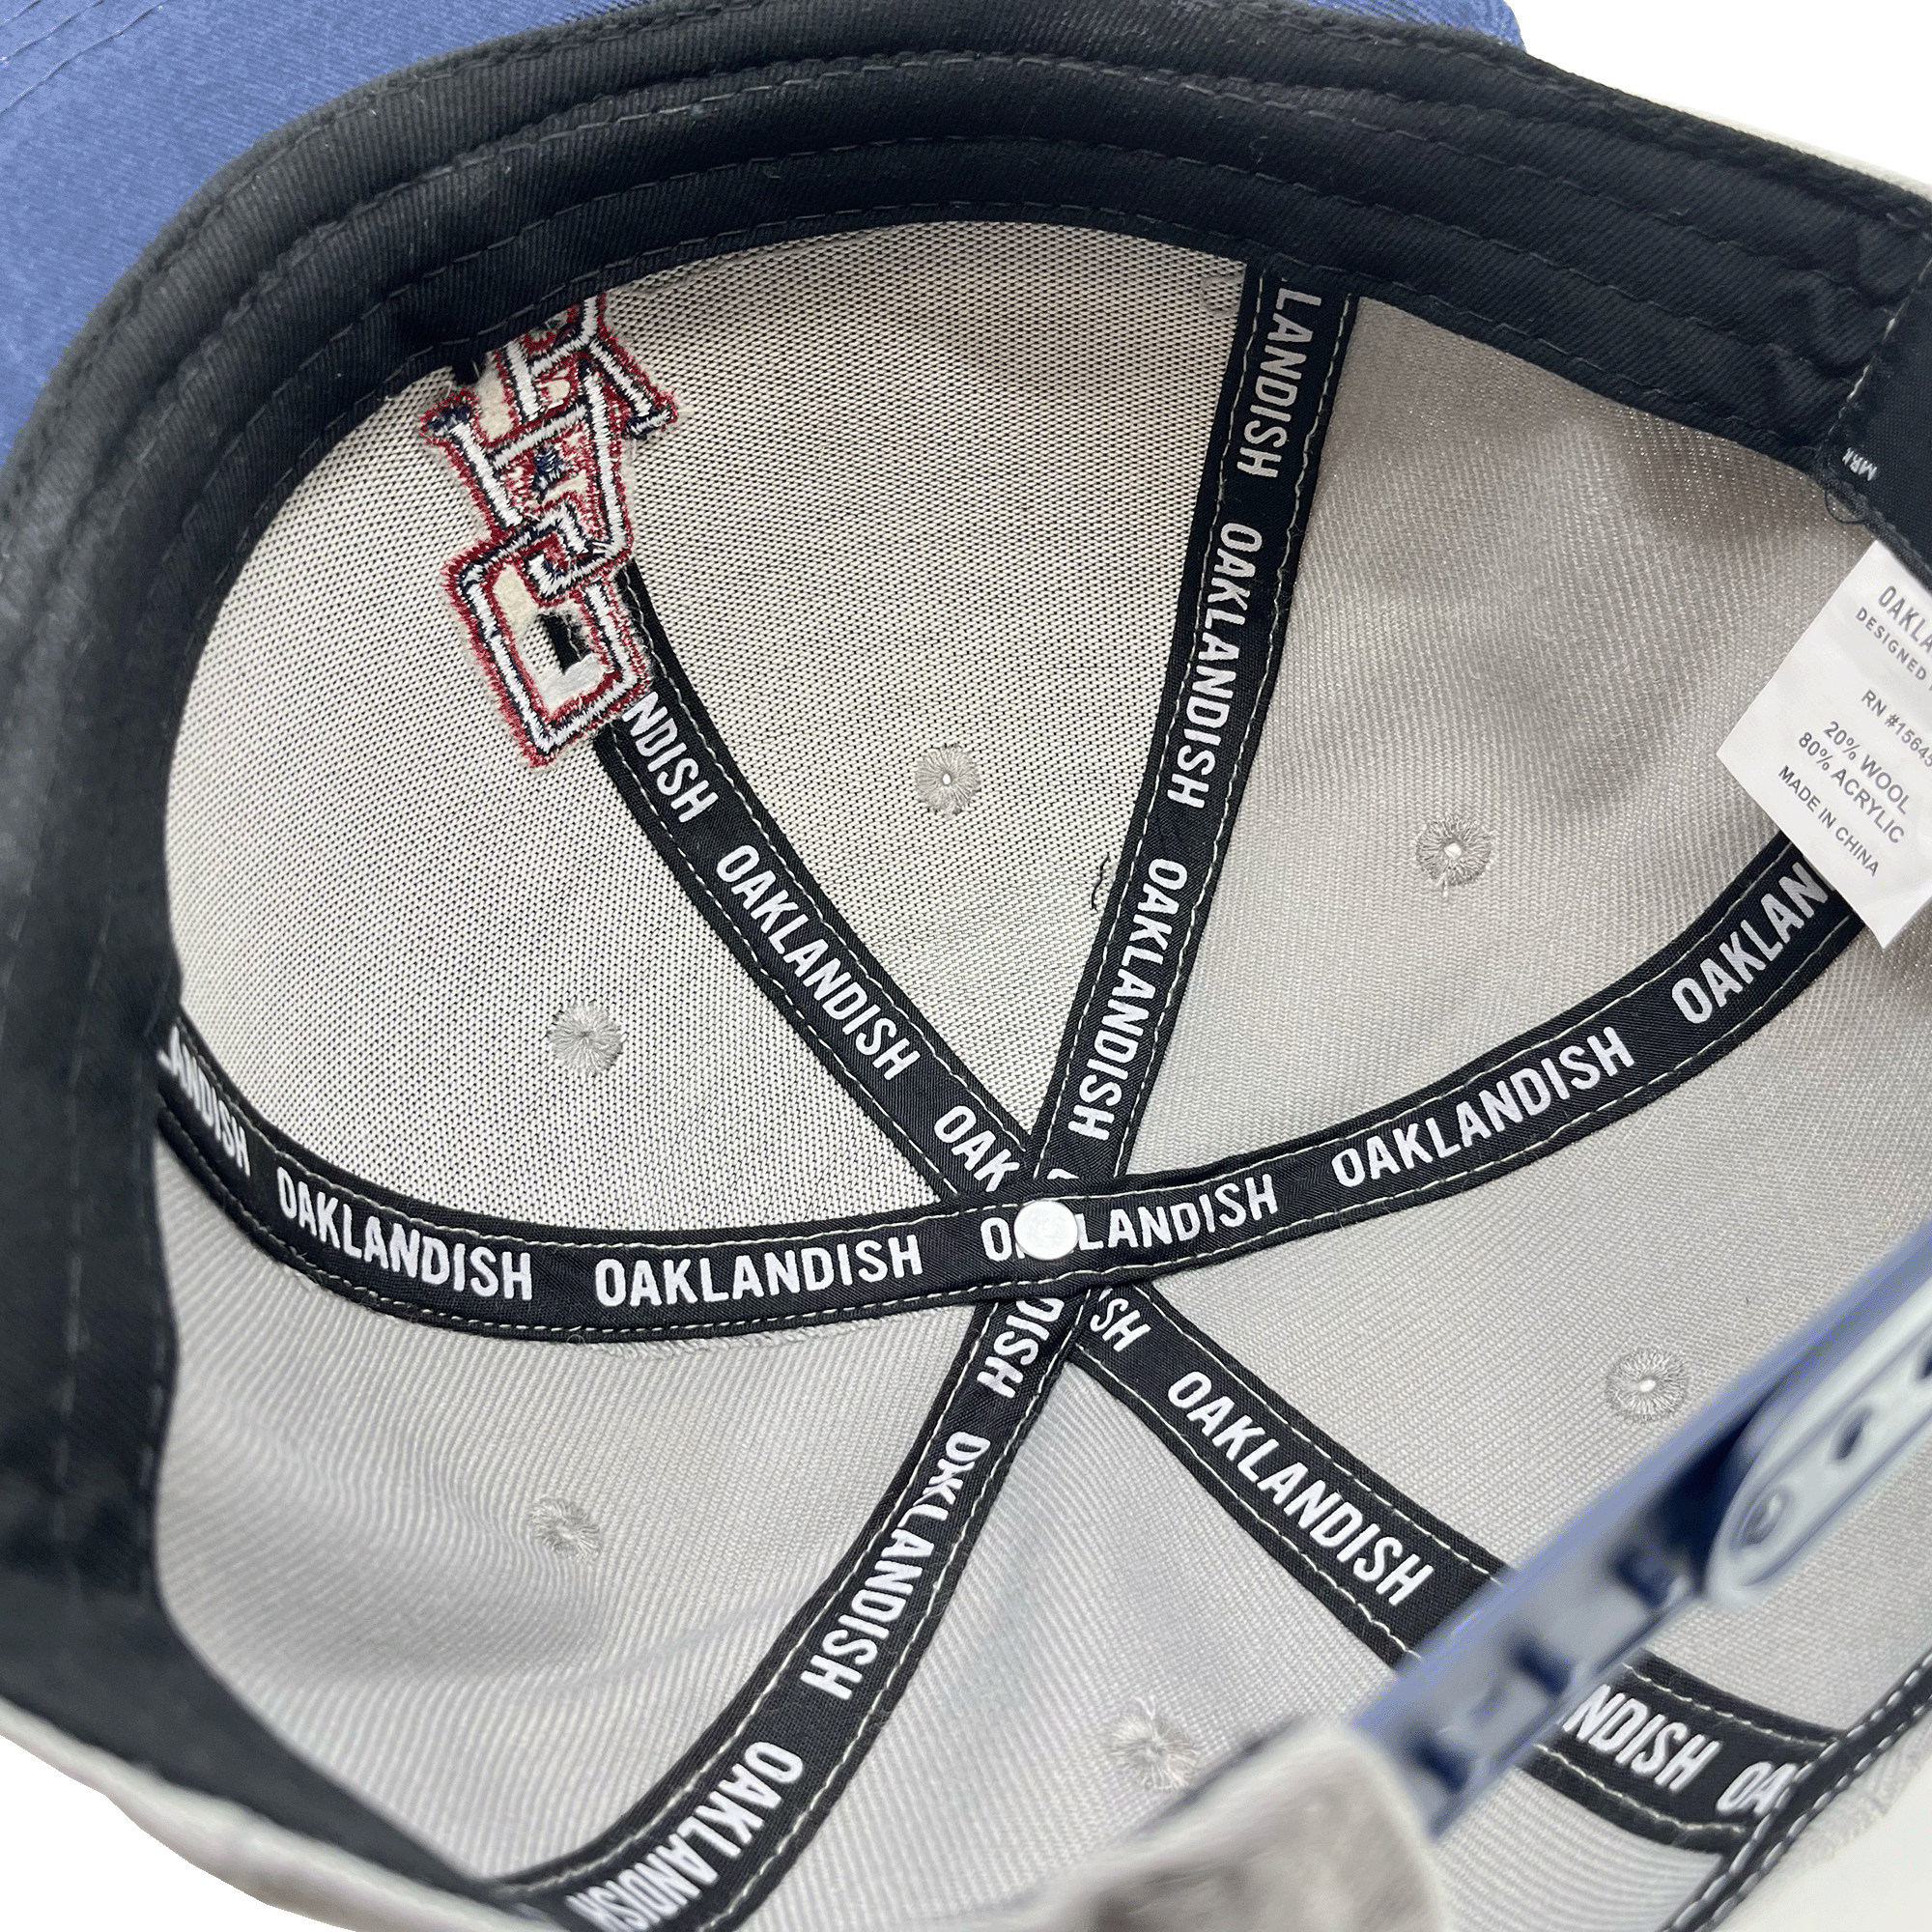 Inside crown view of a grey cap with black striping with Oaklandish wordmark on repeat.